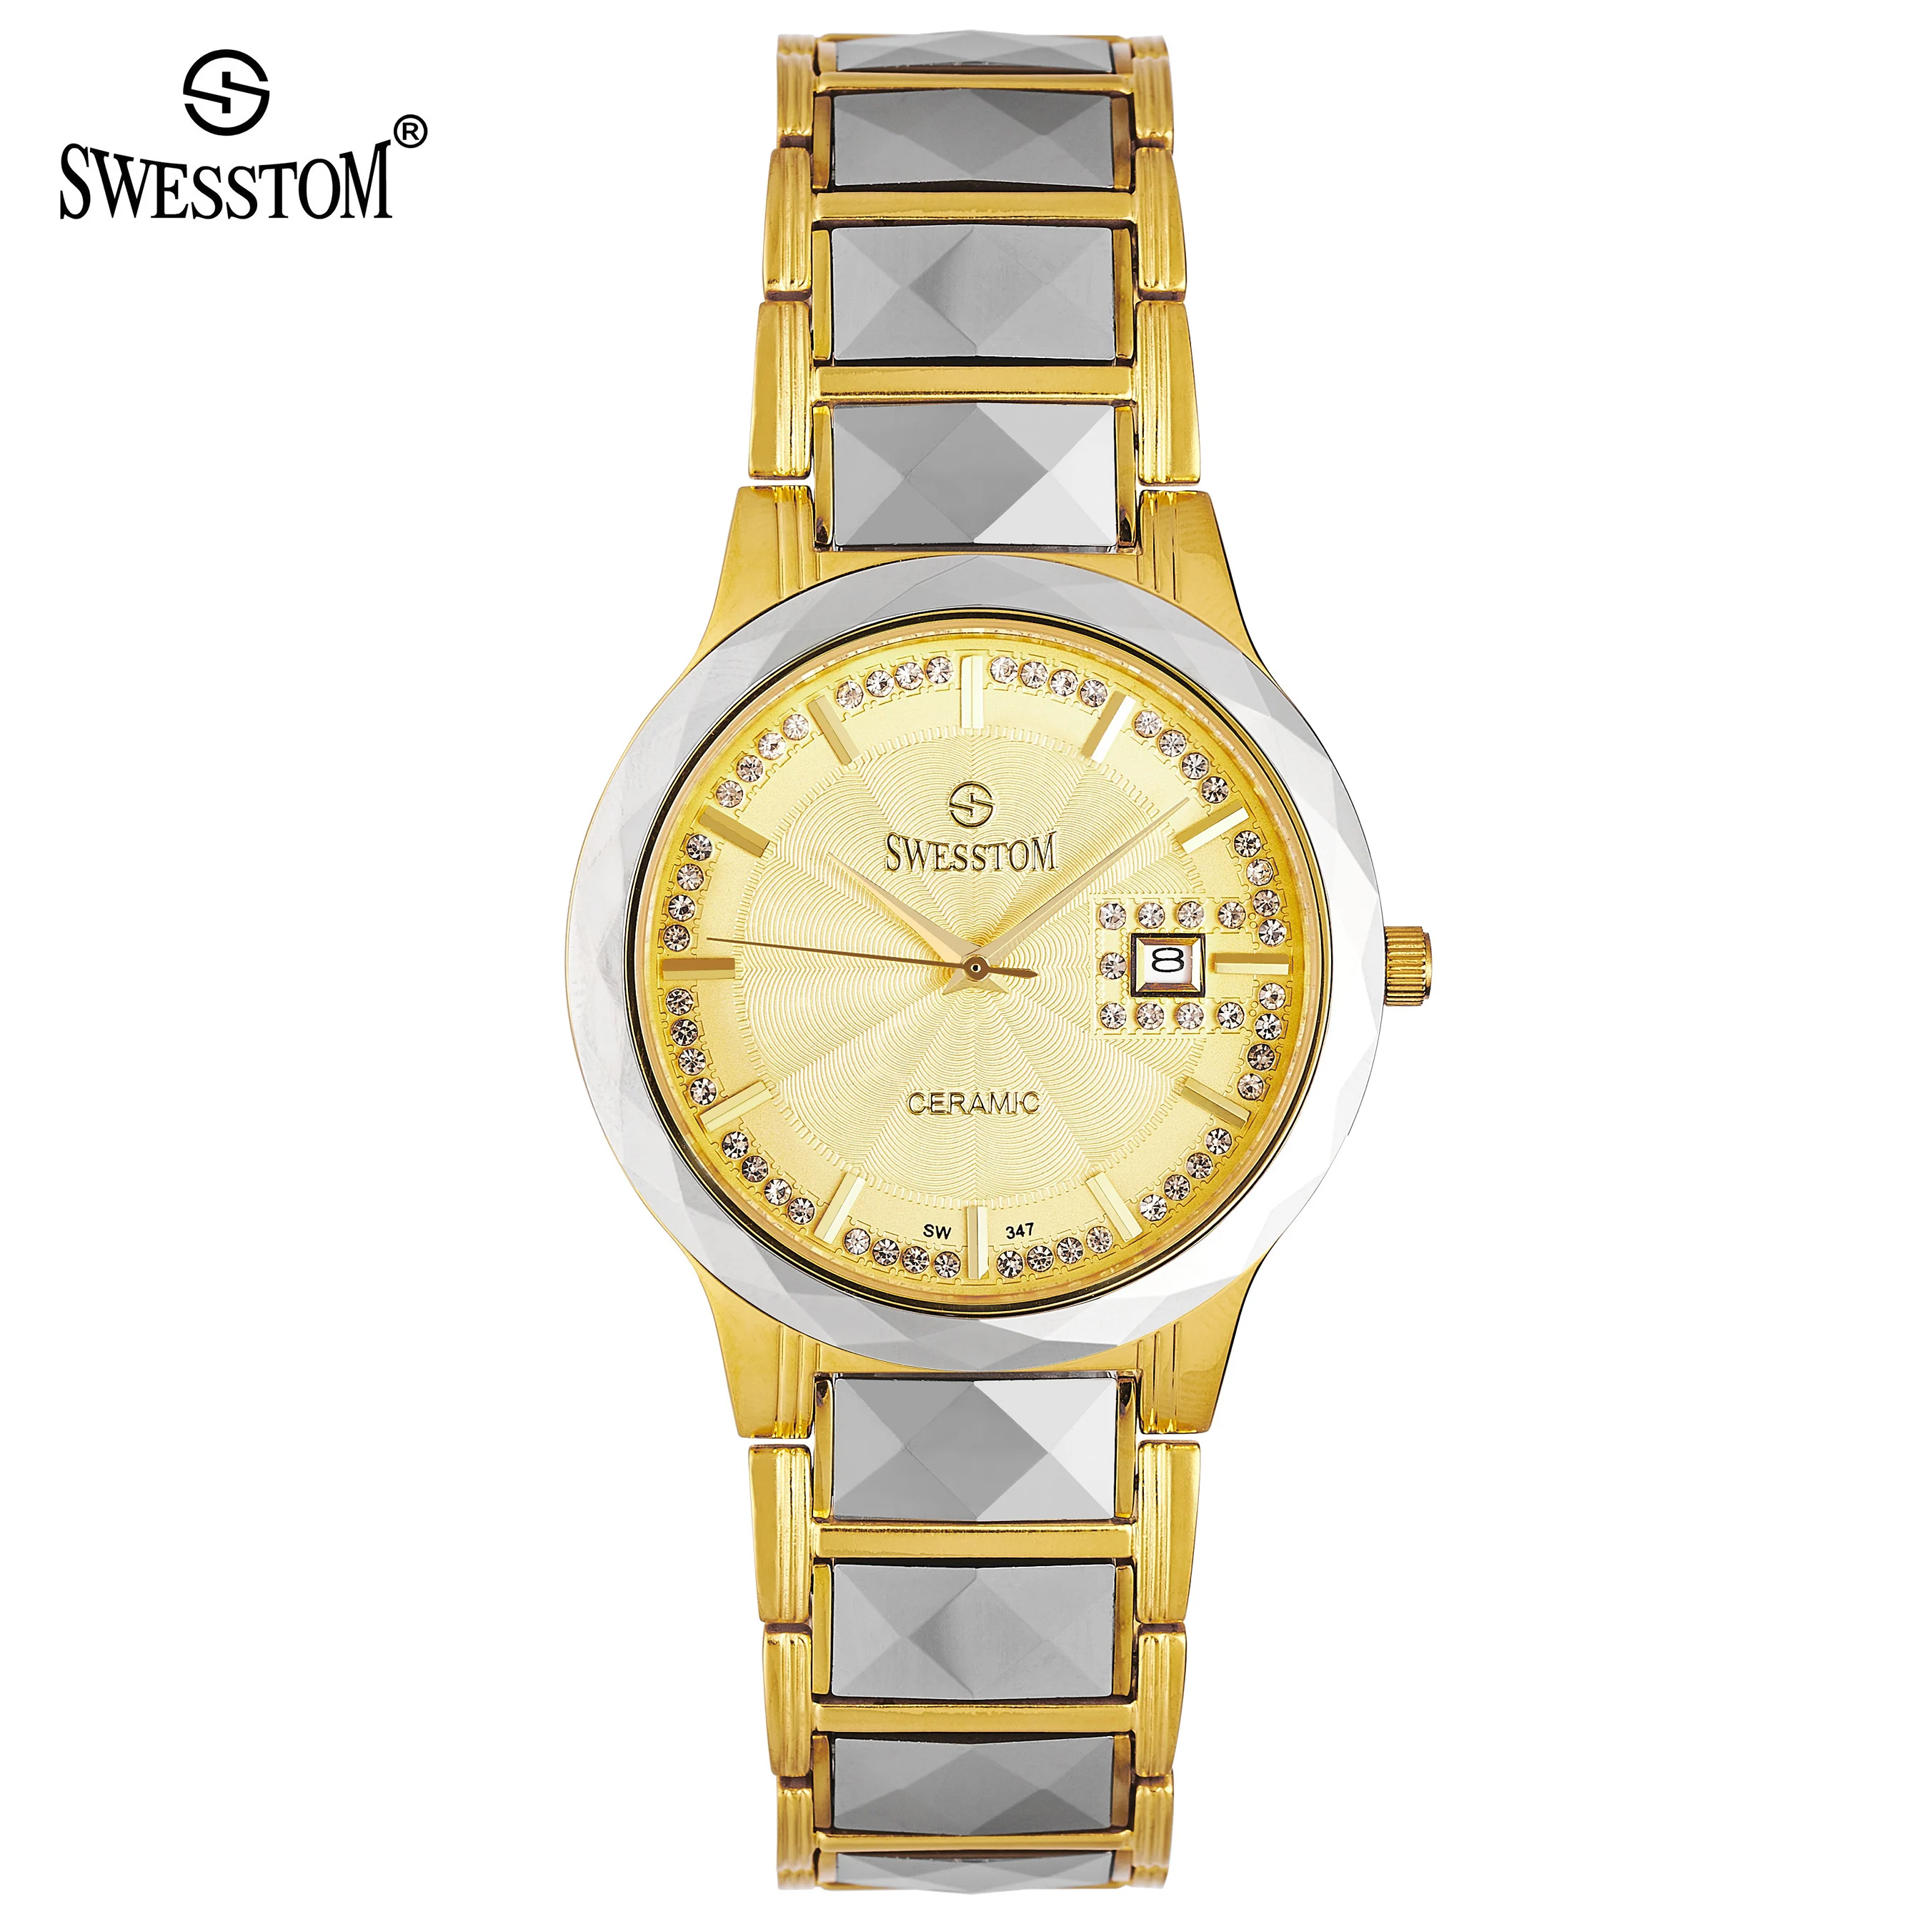 Male Silver Analog Brass Watch 1002B-M0203 – Just In Time